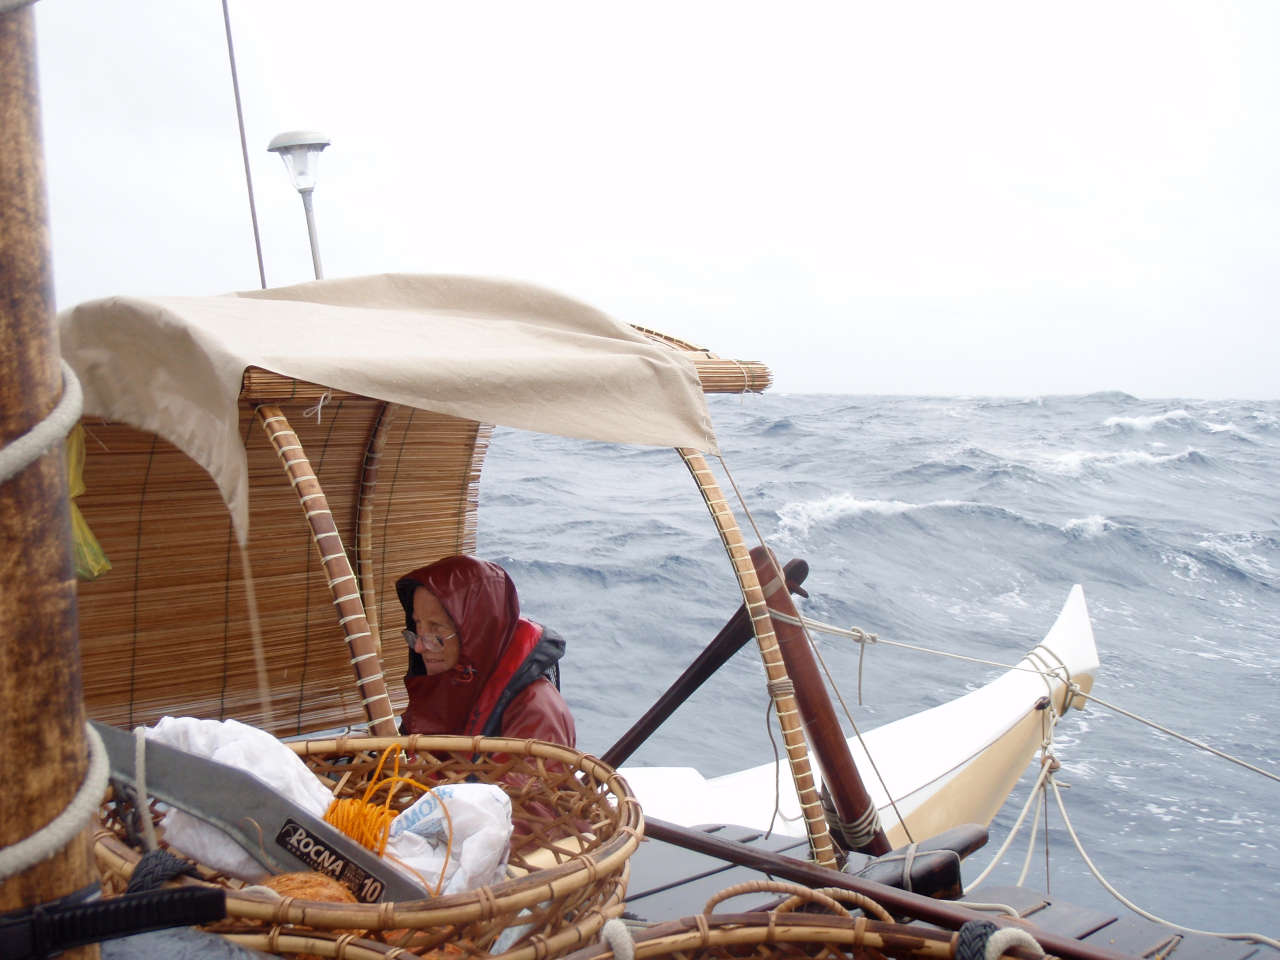 Hanneke at the helm